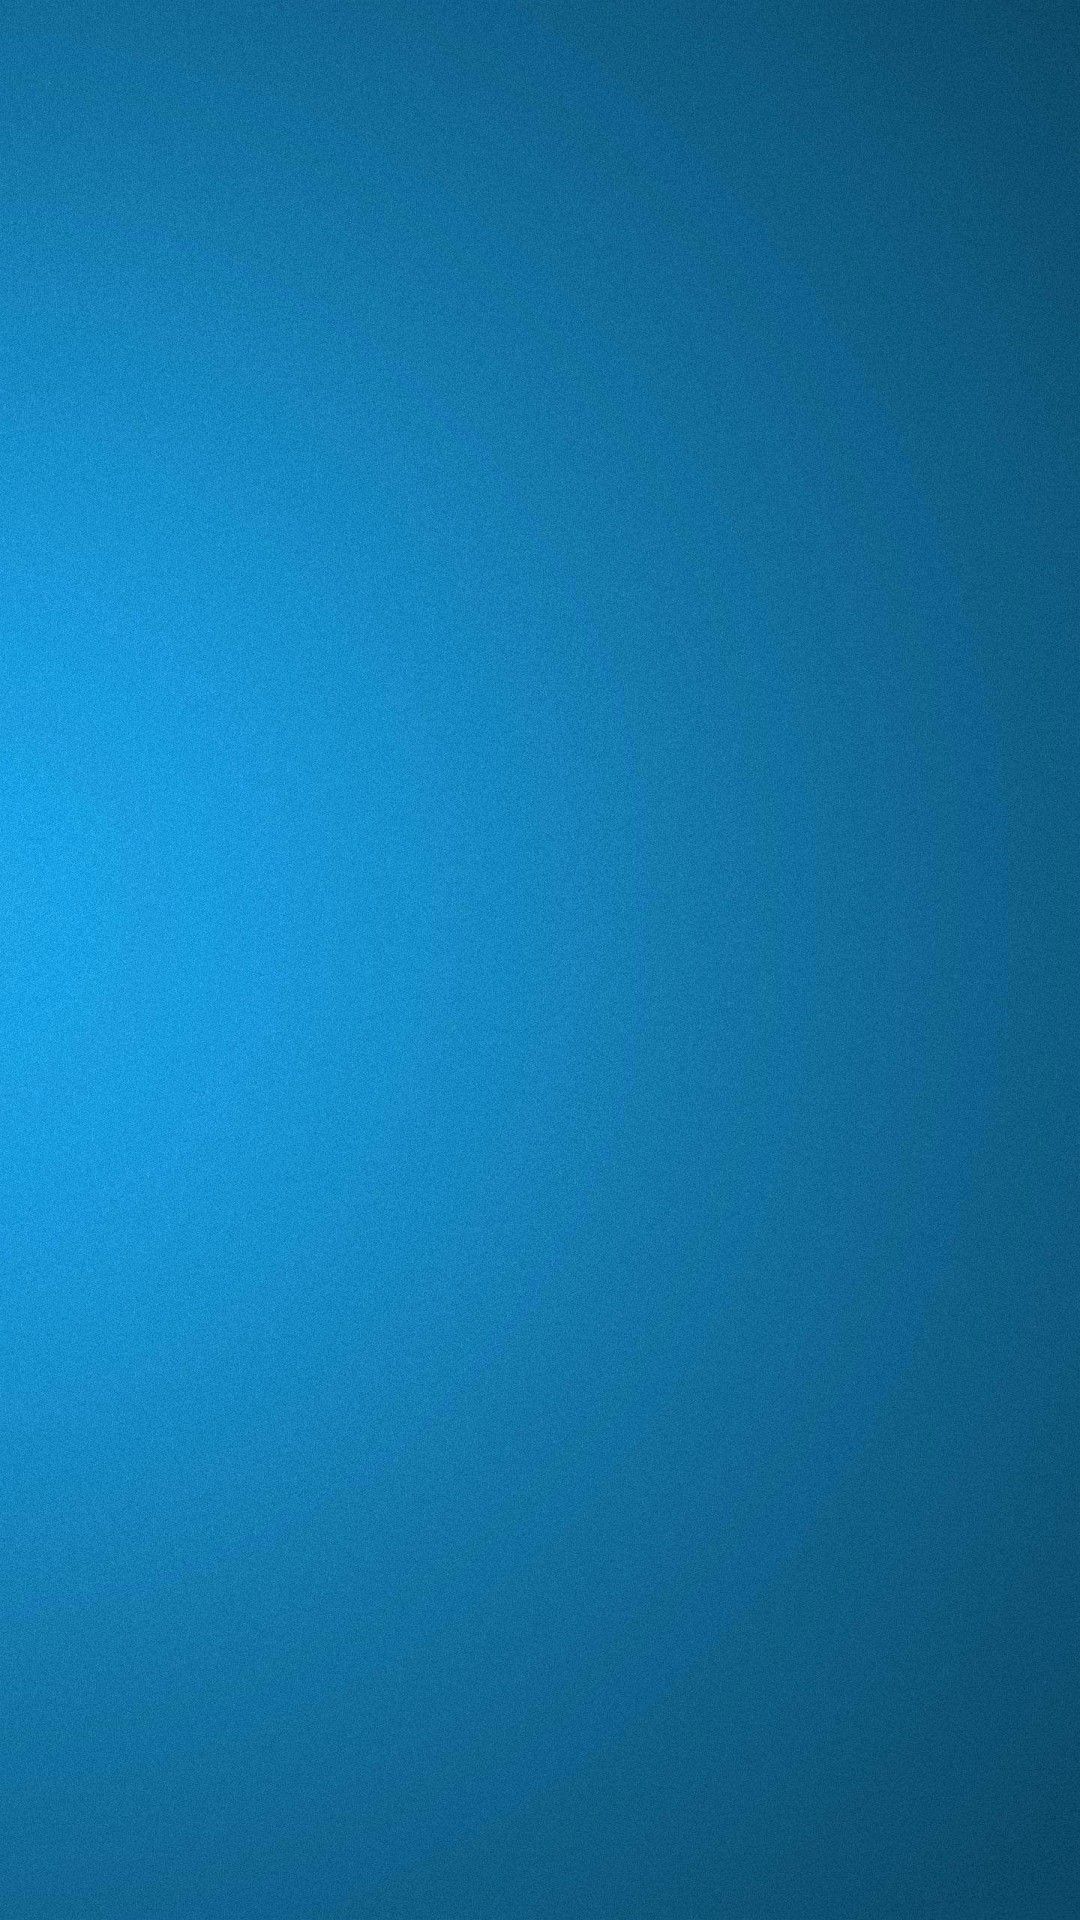 Wallpaper Iphone 6 Plus Wall Blue 5 5 Inches - 1080 x 1920